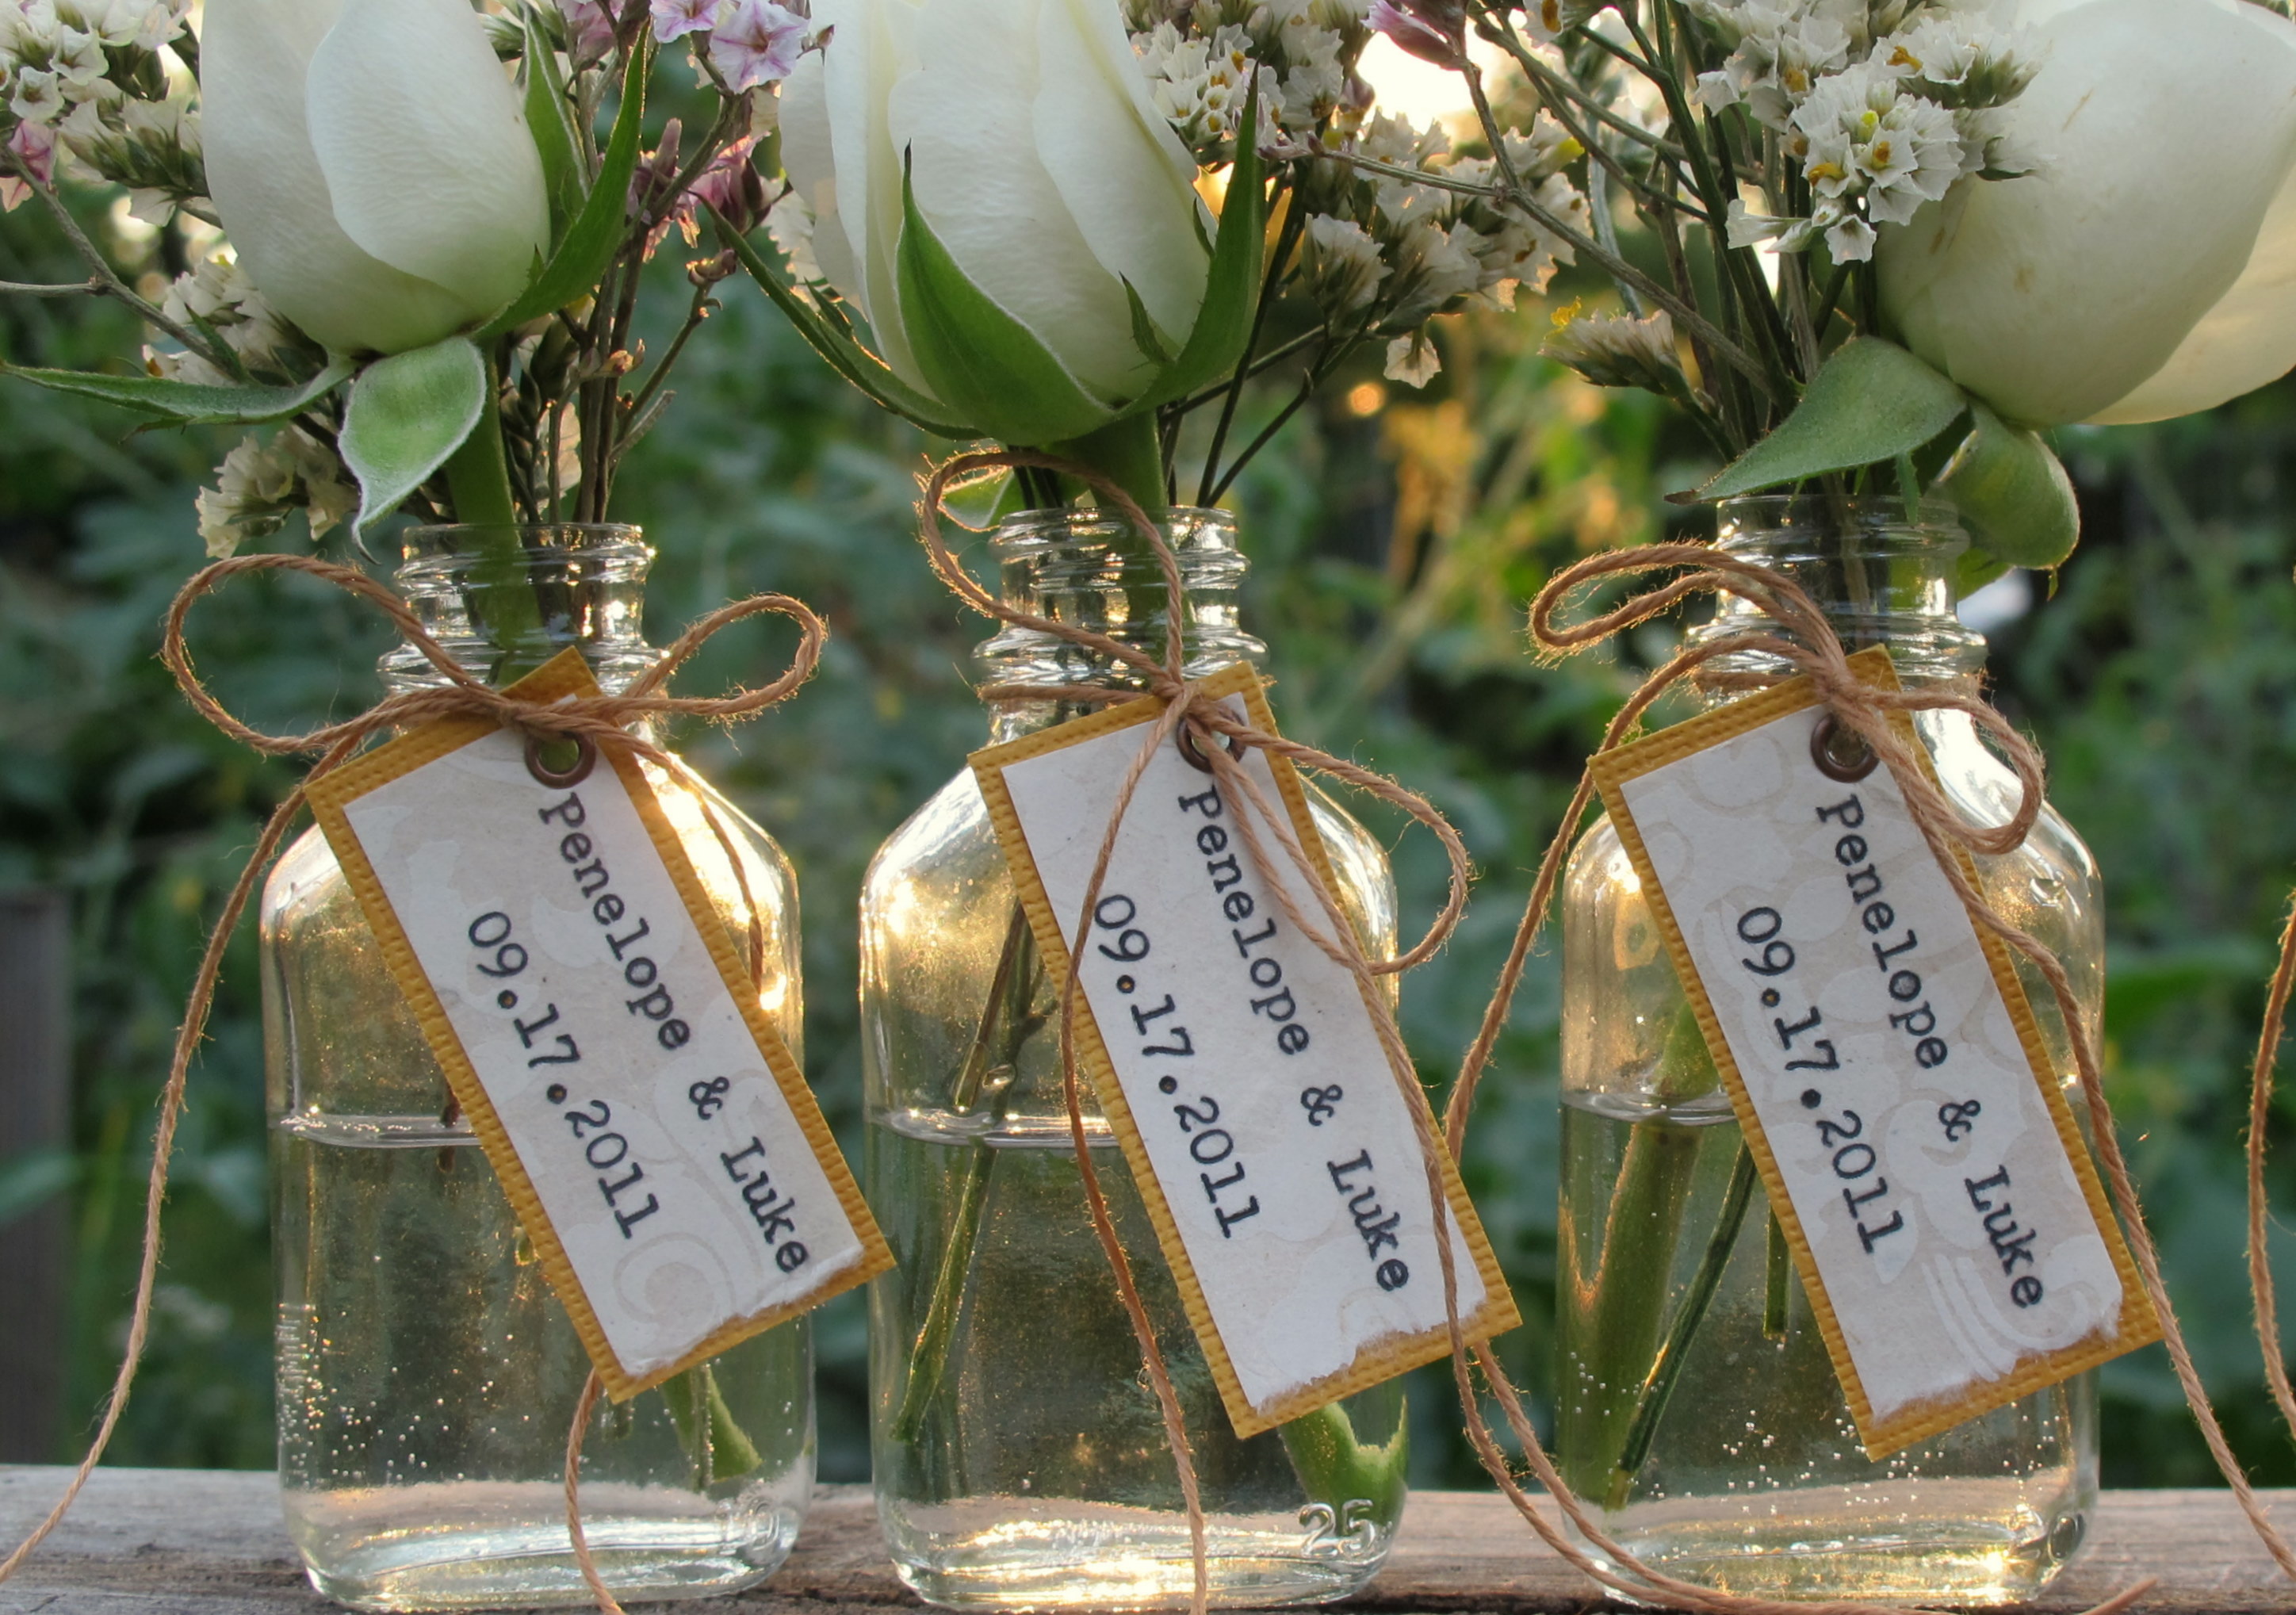 Rustic. Vintage-Inspired. Natural... Unique Wedding Favors by joblake.etsy.com